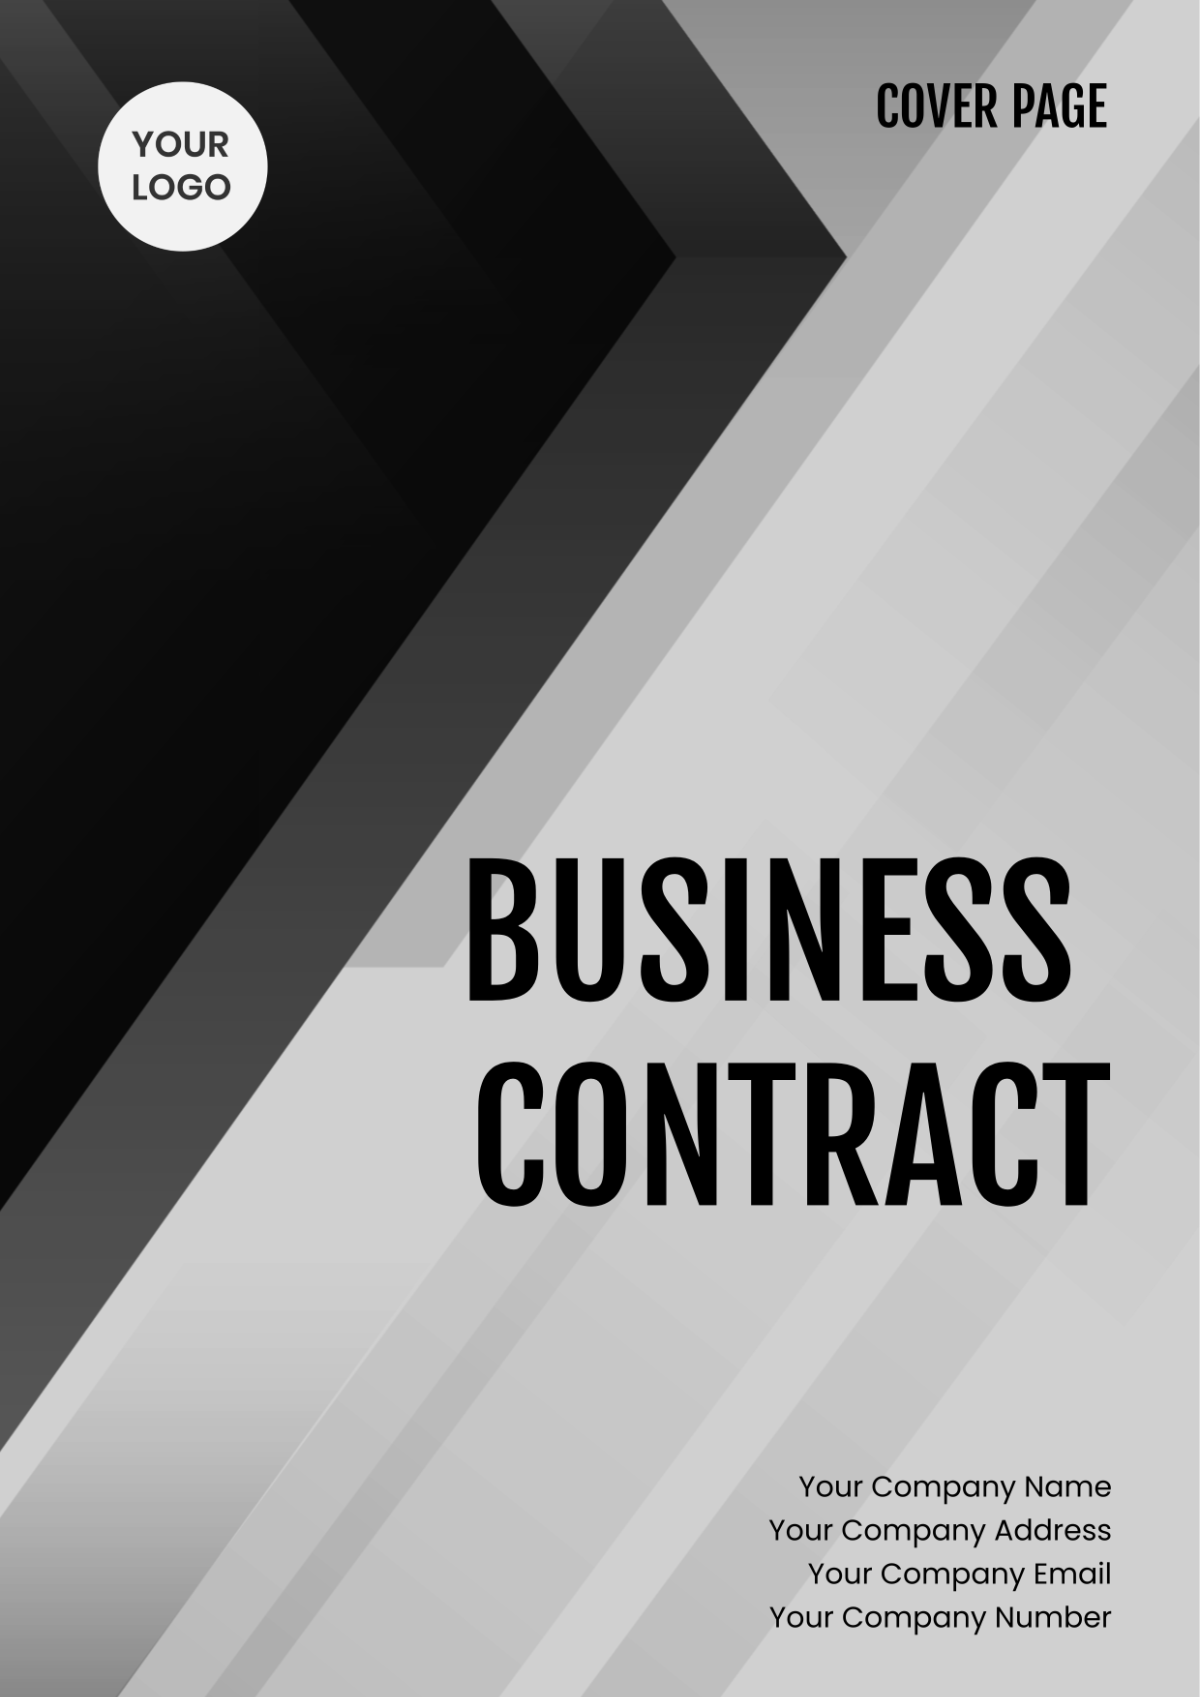 Business Contract Cover Page